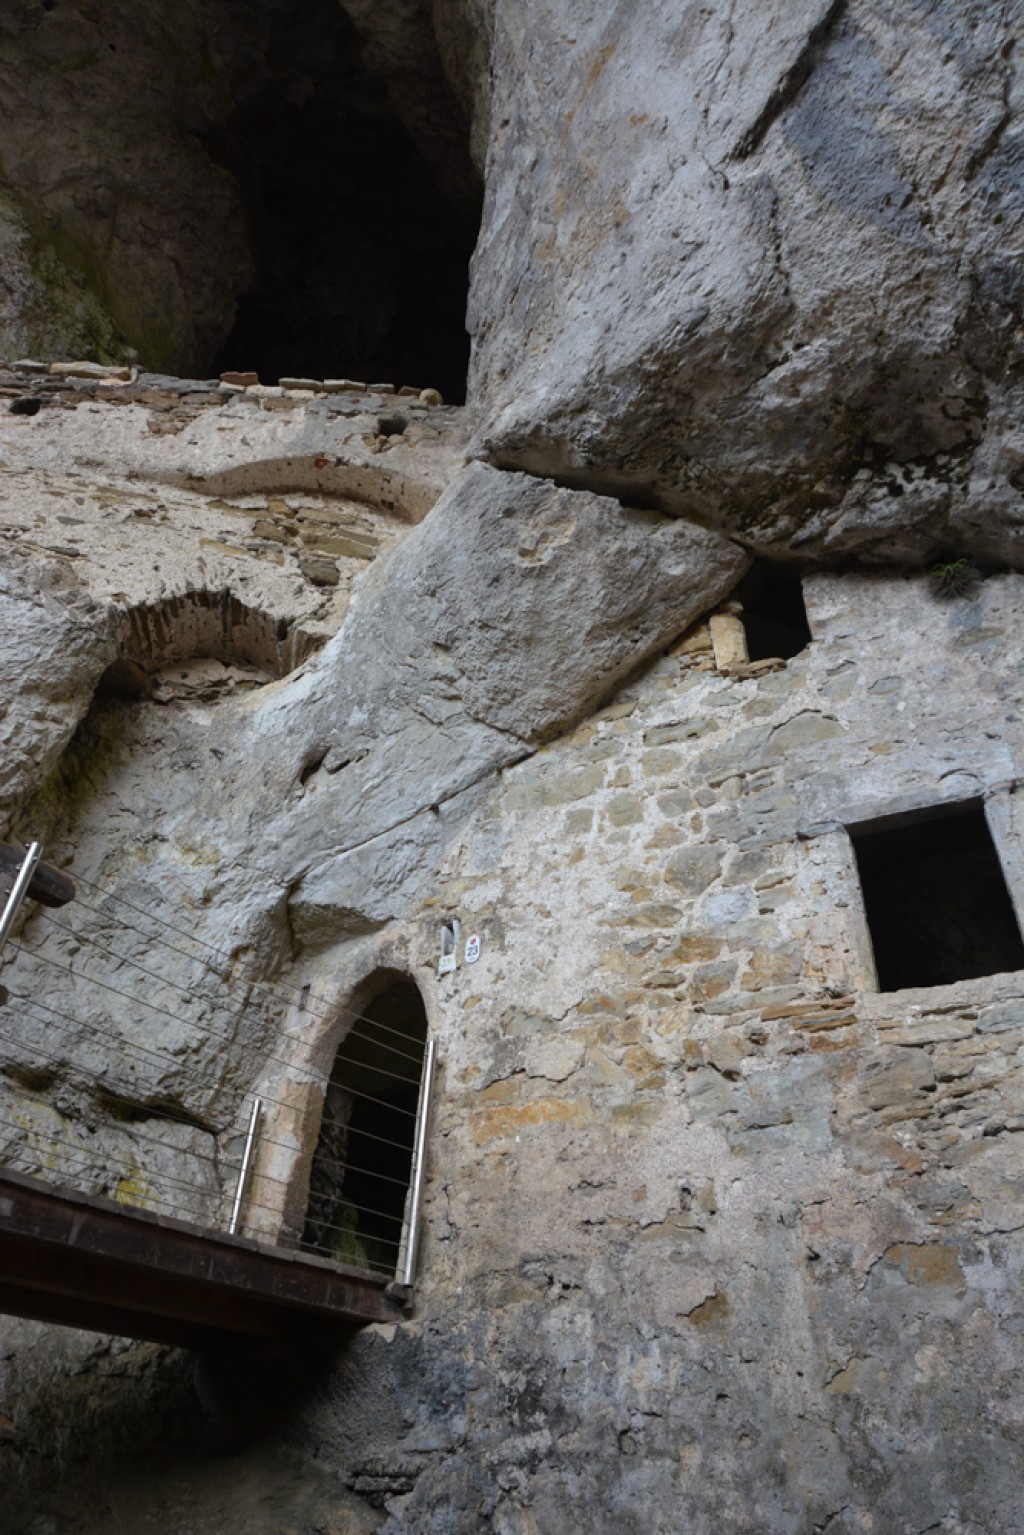 Rooms built into the cave wall